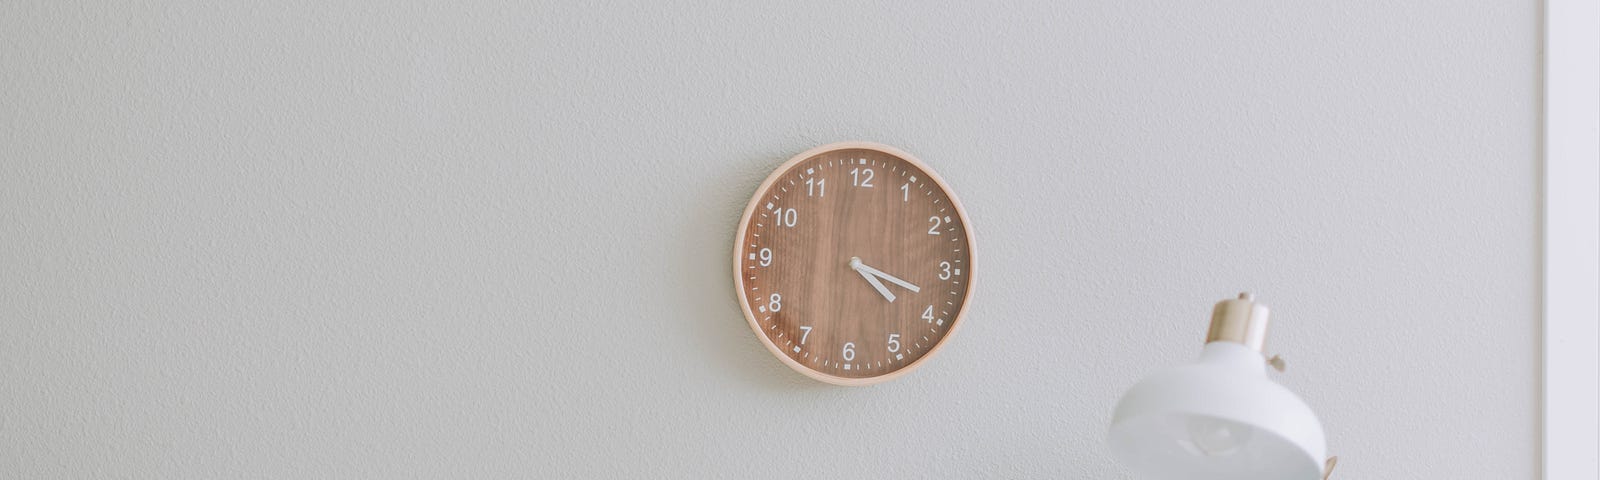 A minimalist composition featuring a plain grey wall as the backdrop. In the foreground, a wooden digital clock is displayed alongside a simple white lamp. On a white table beneath them, a plain broad-leafed plant in a white bowl adds a touch of greenery to the scene.